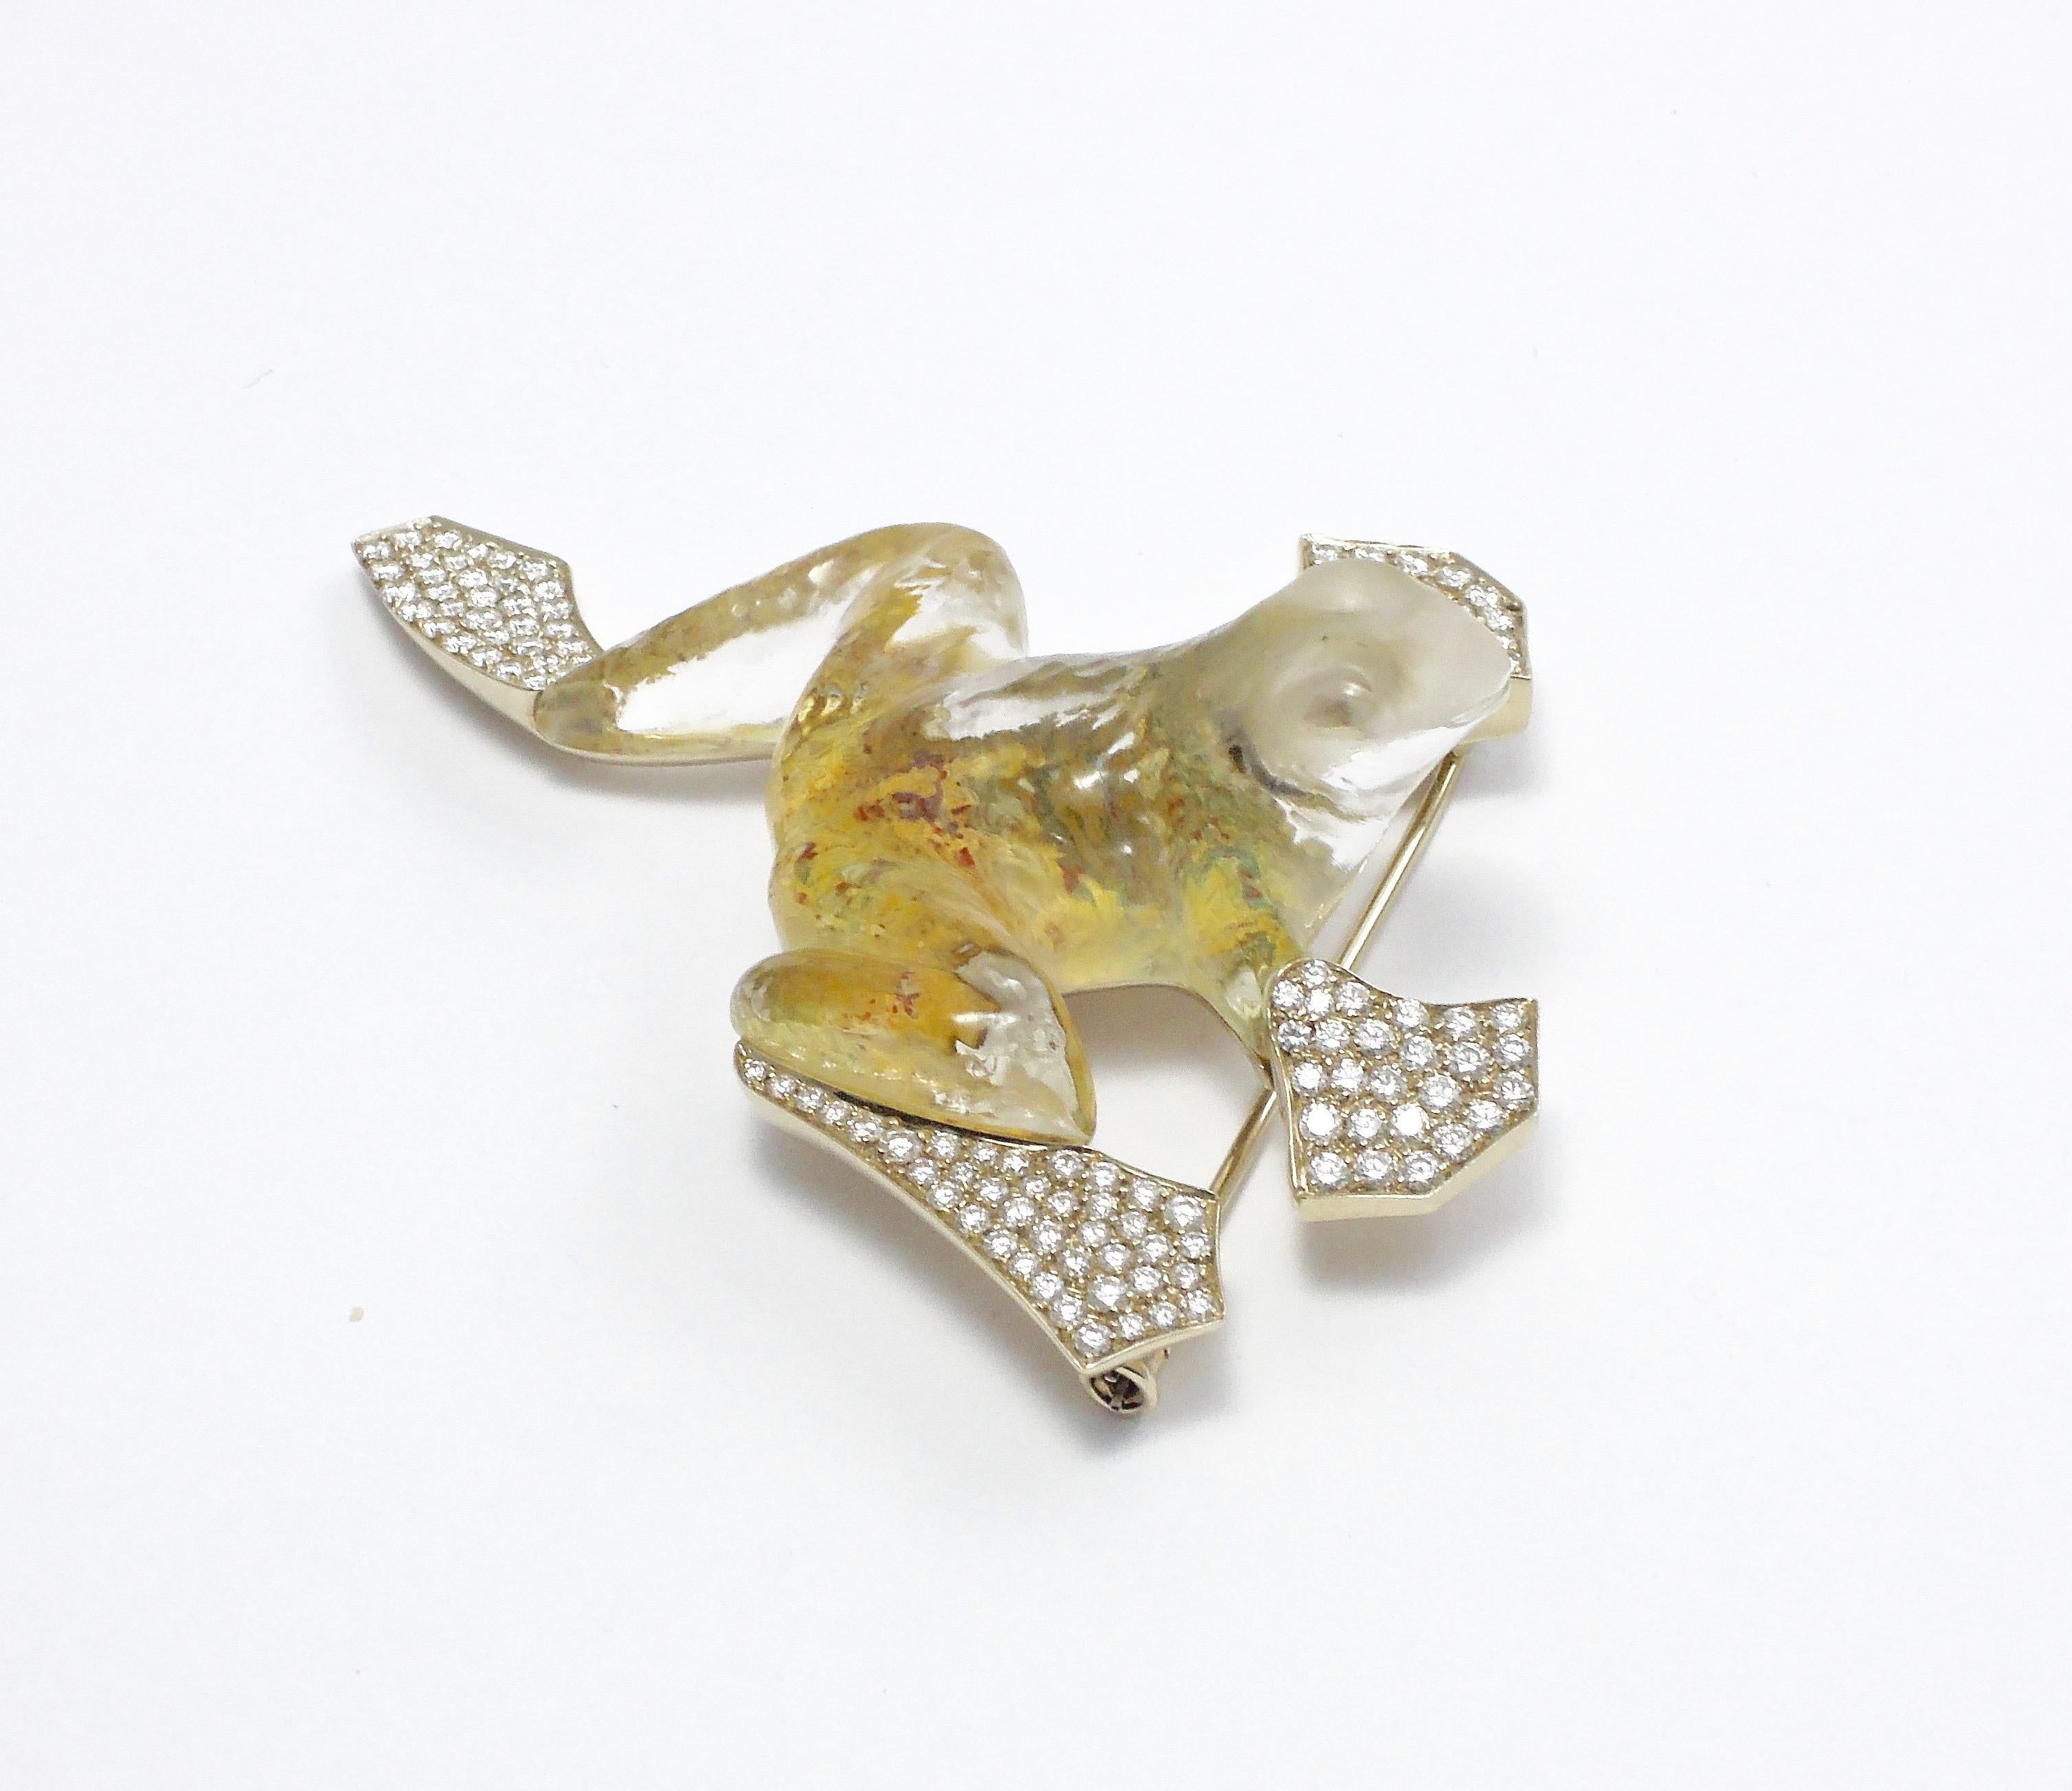 Big Size 18kt White Gold, Rock Crystal, and Diamond Vhernier frog brooch featuring carved rock crystal and imperial topaz frog with webbed feet accented with round diamonds. 

Total carat weight 1.32, G-H in color and VS in clarity.
Marked on the